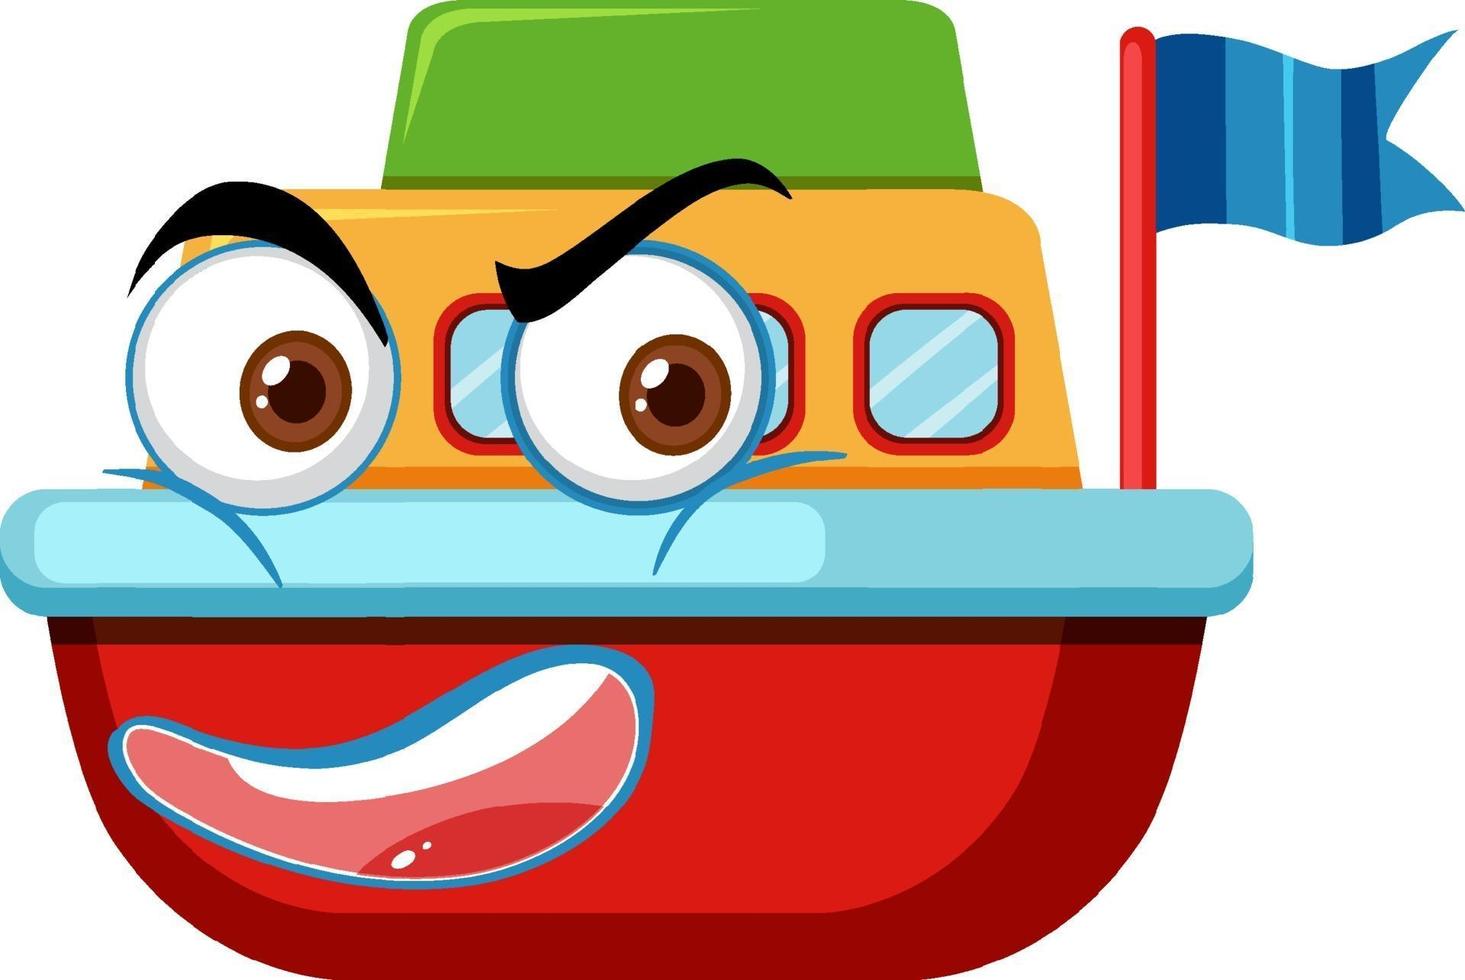 Boat toy cartoon character with facial expression vector